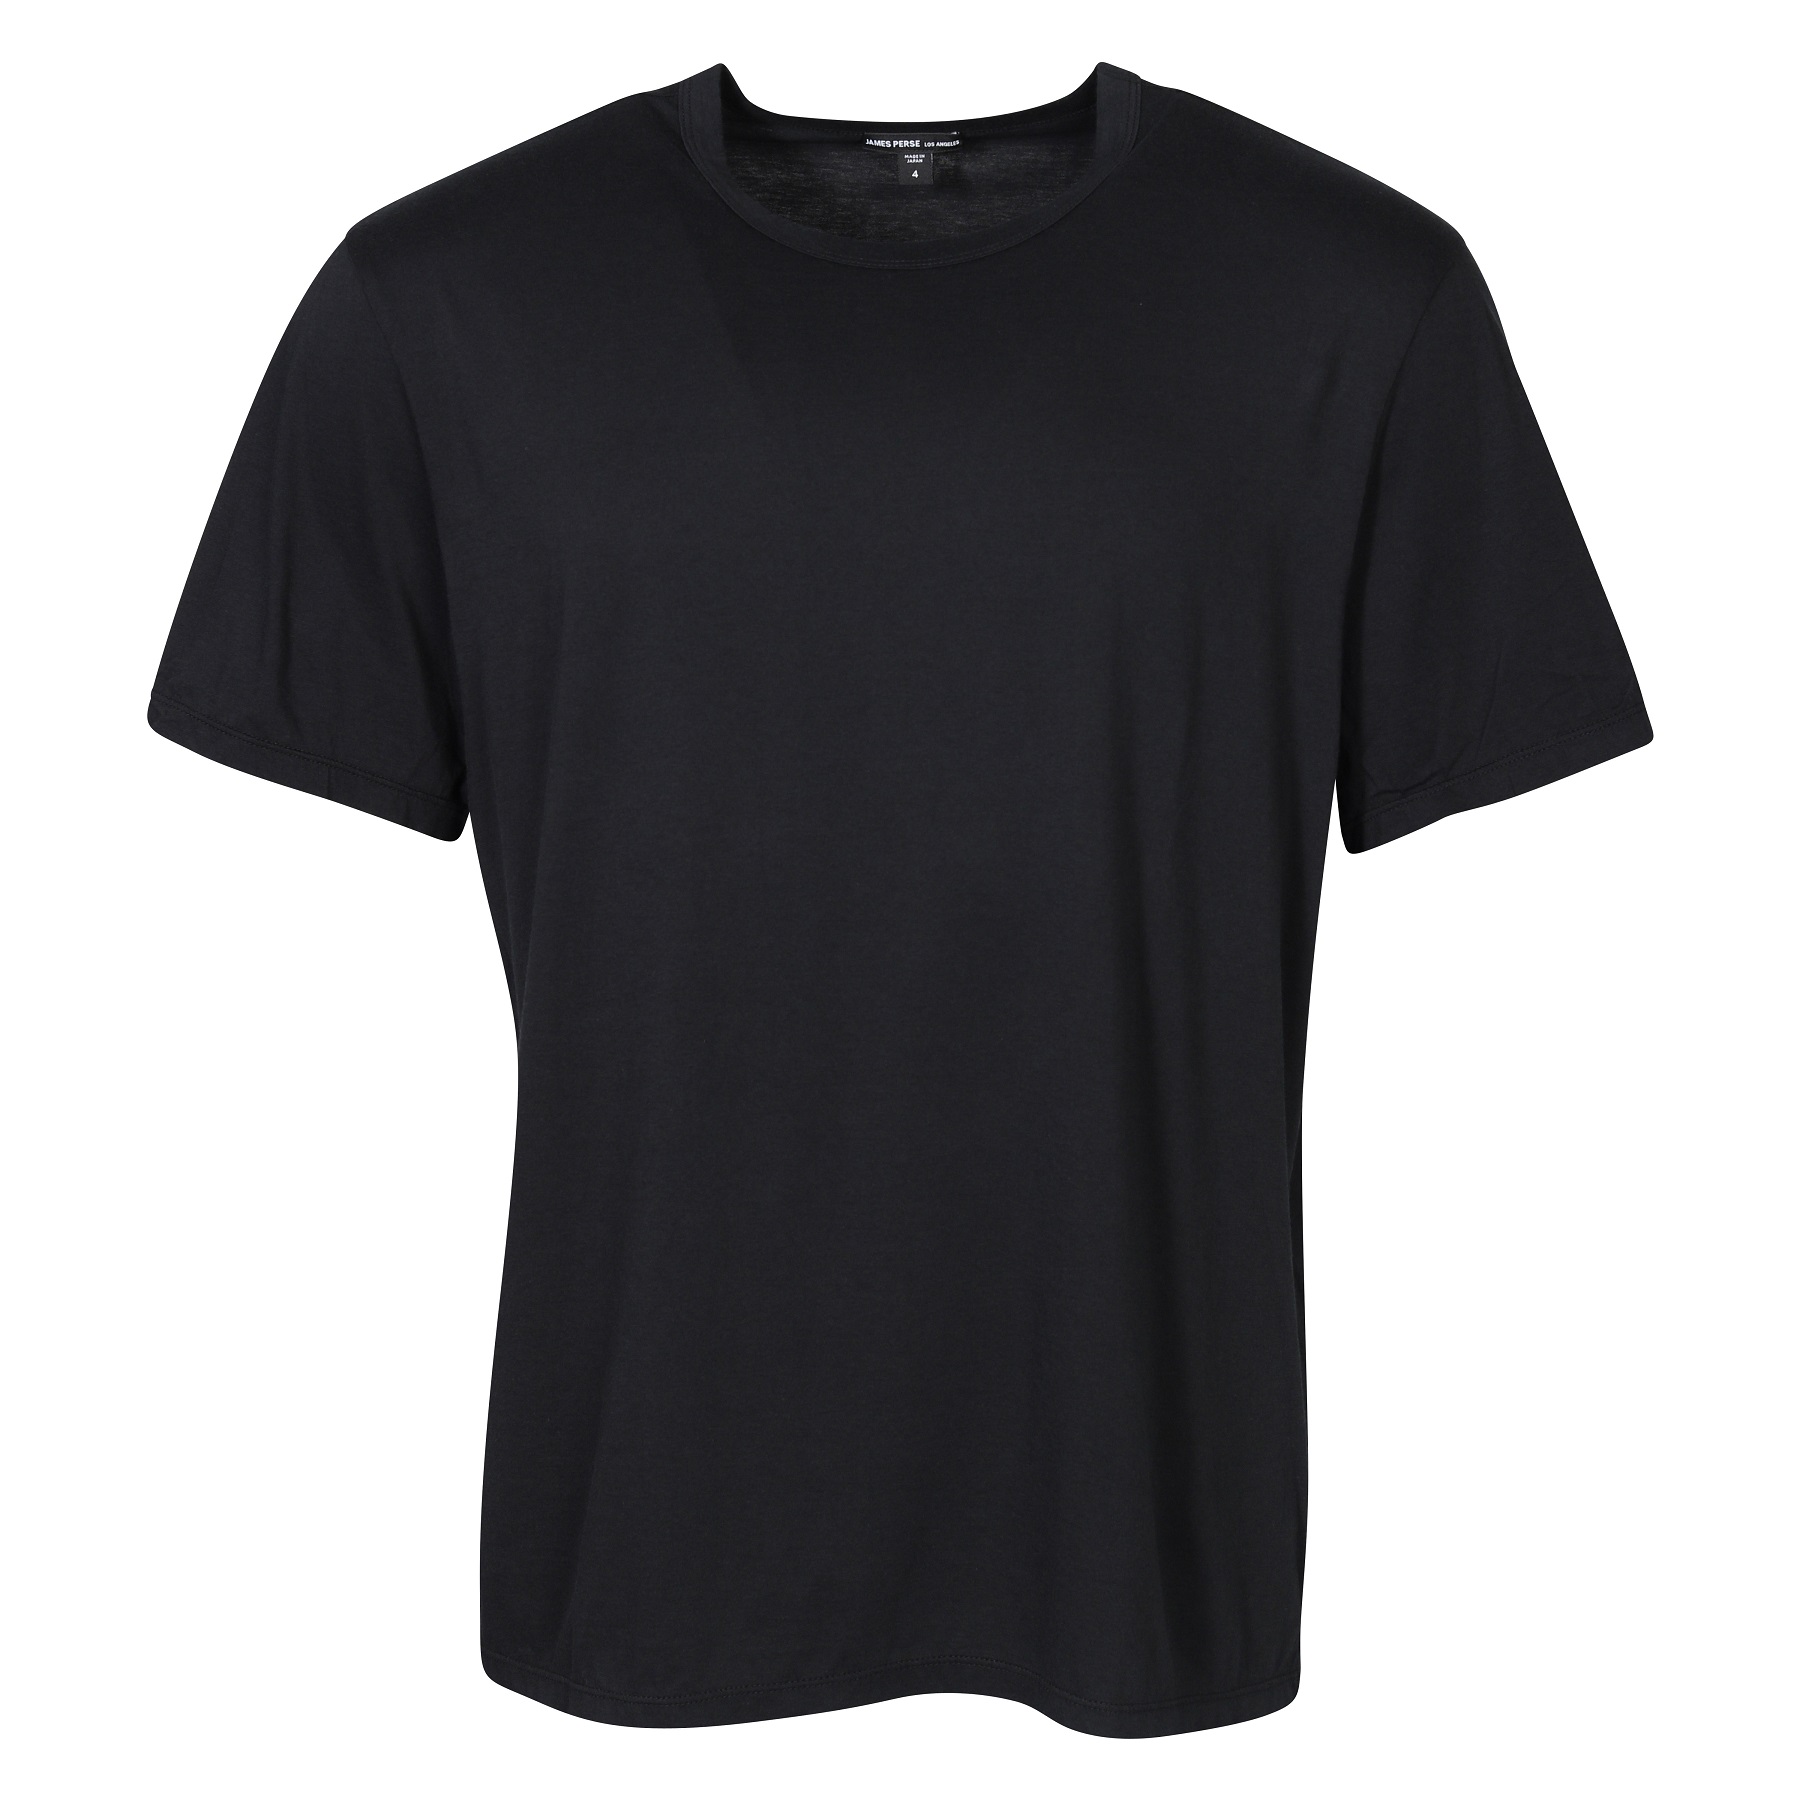 James Perse Elevated Lotus Jersey T-Shirt in Black